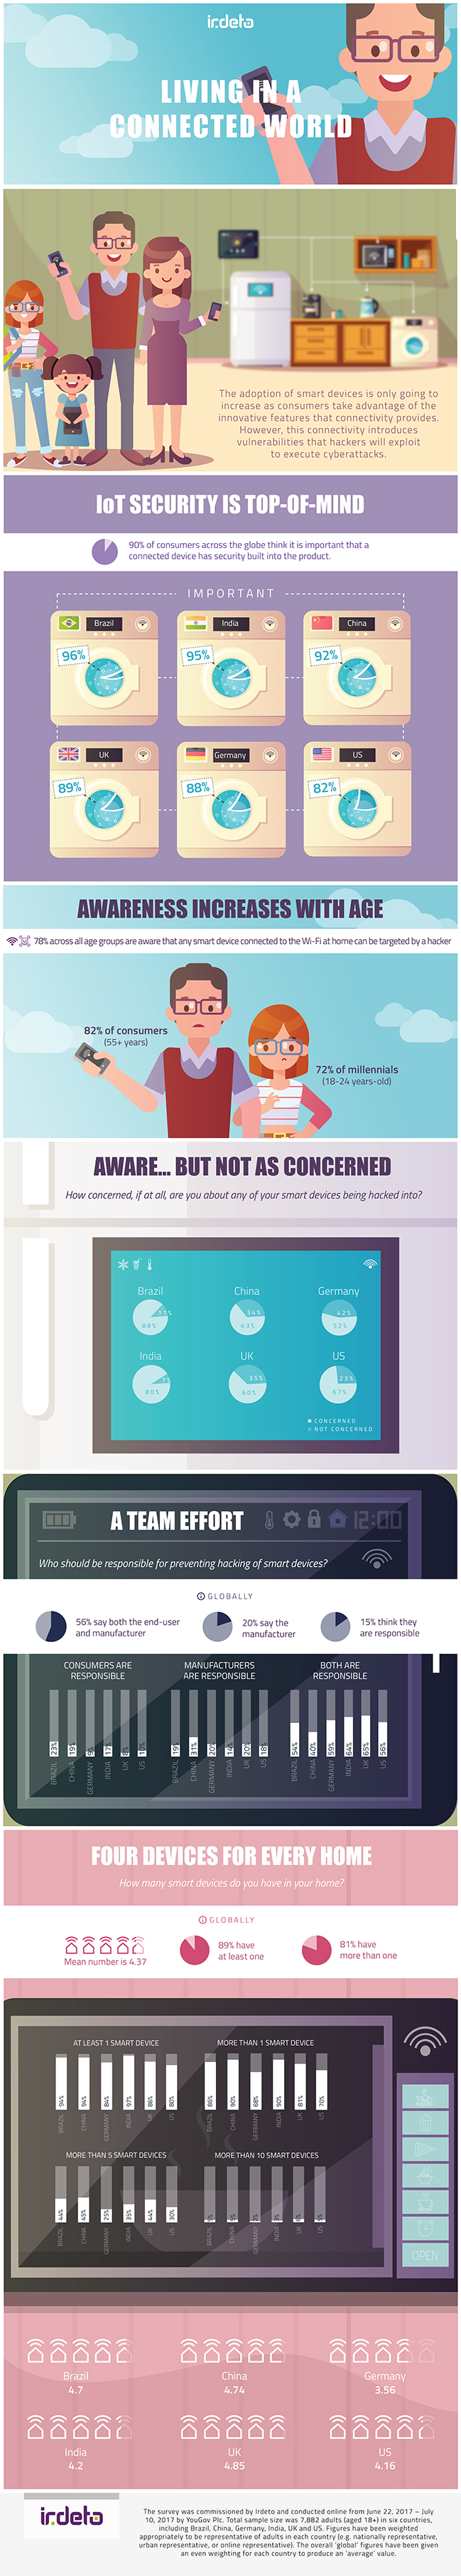 IoT Security Survey Infographic - FINAL